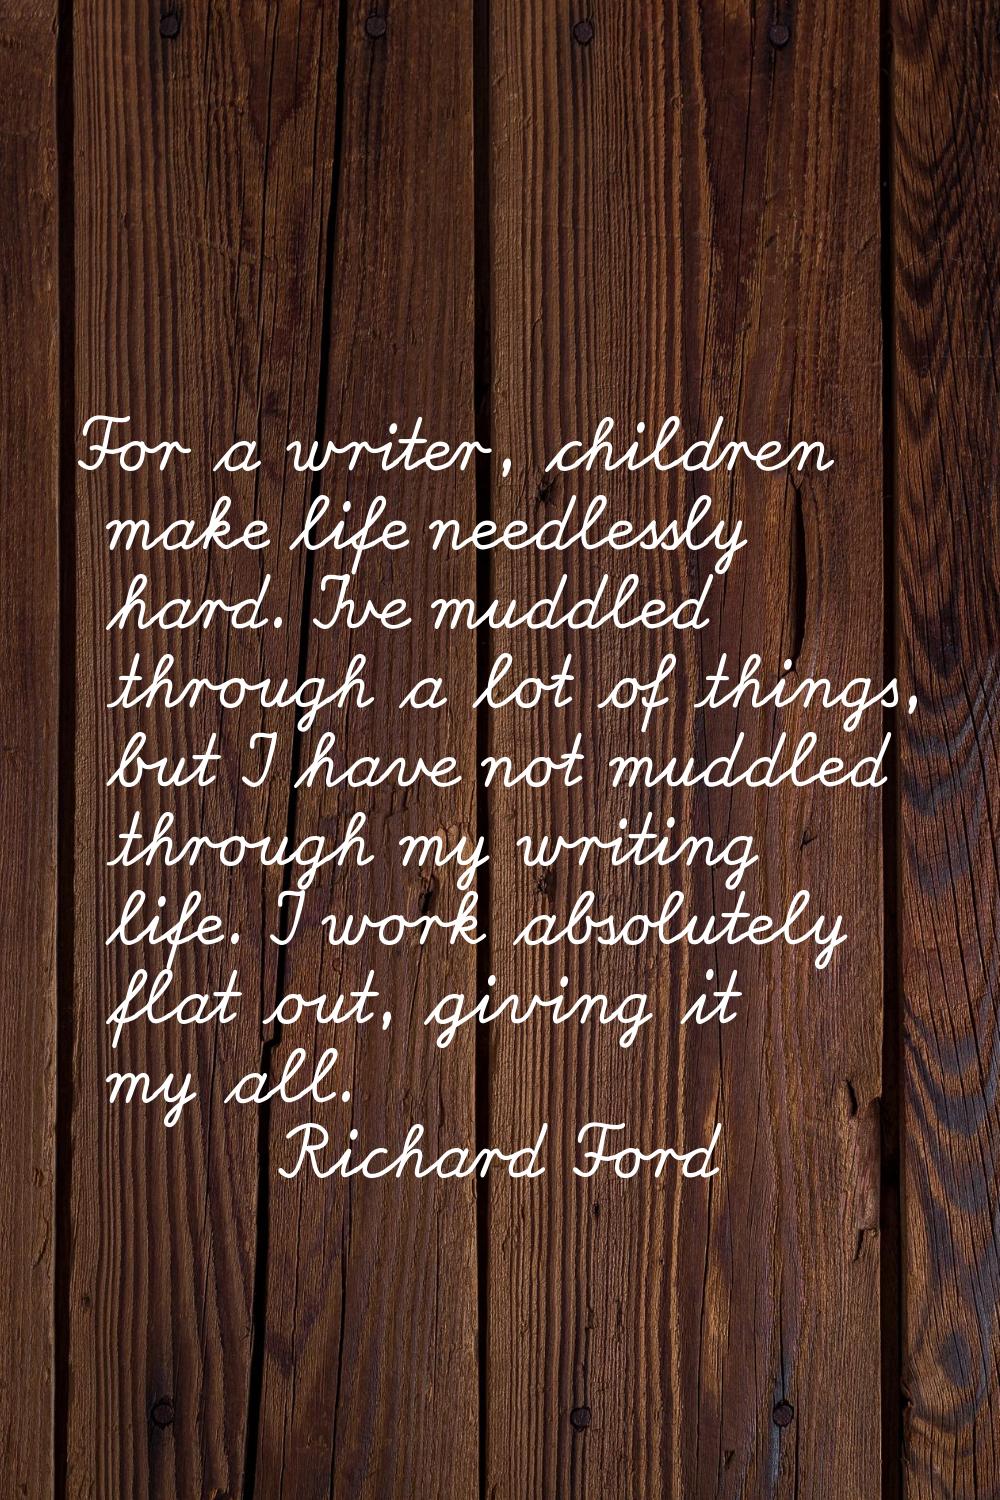 For a writer, children make life needlessly hard. I've muddled through a lot of things, but I have 